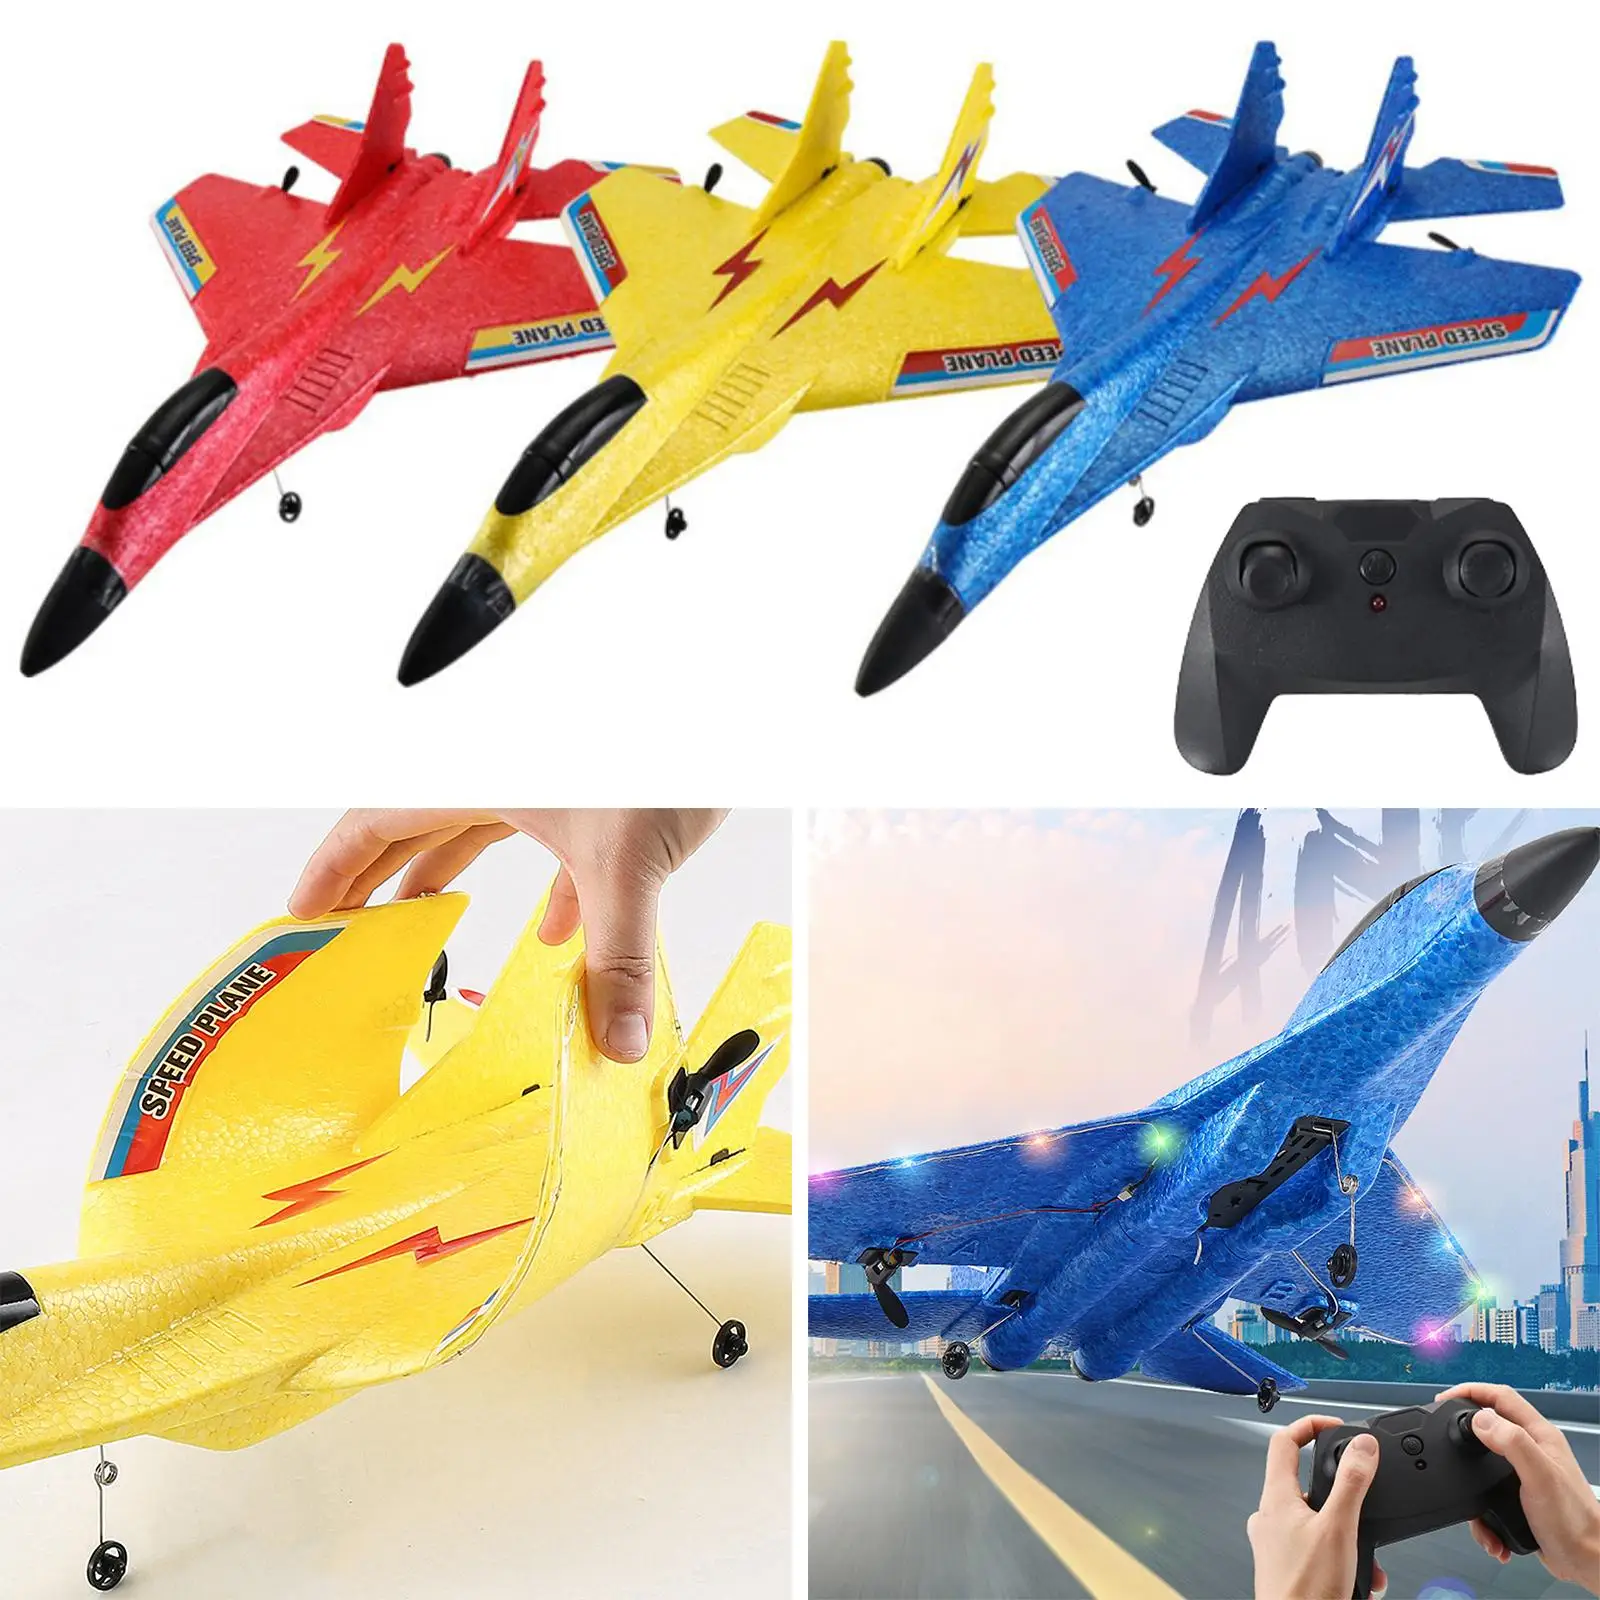  2CH Remote Control  Mig 530 RC  Glider for Children Christmas Gifts Easy to Assembly Fixed Wing 320